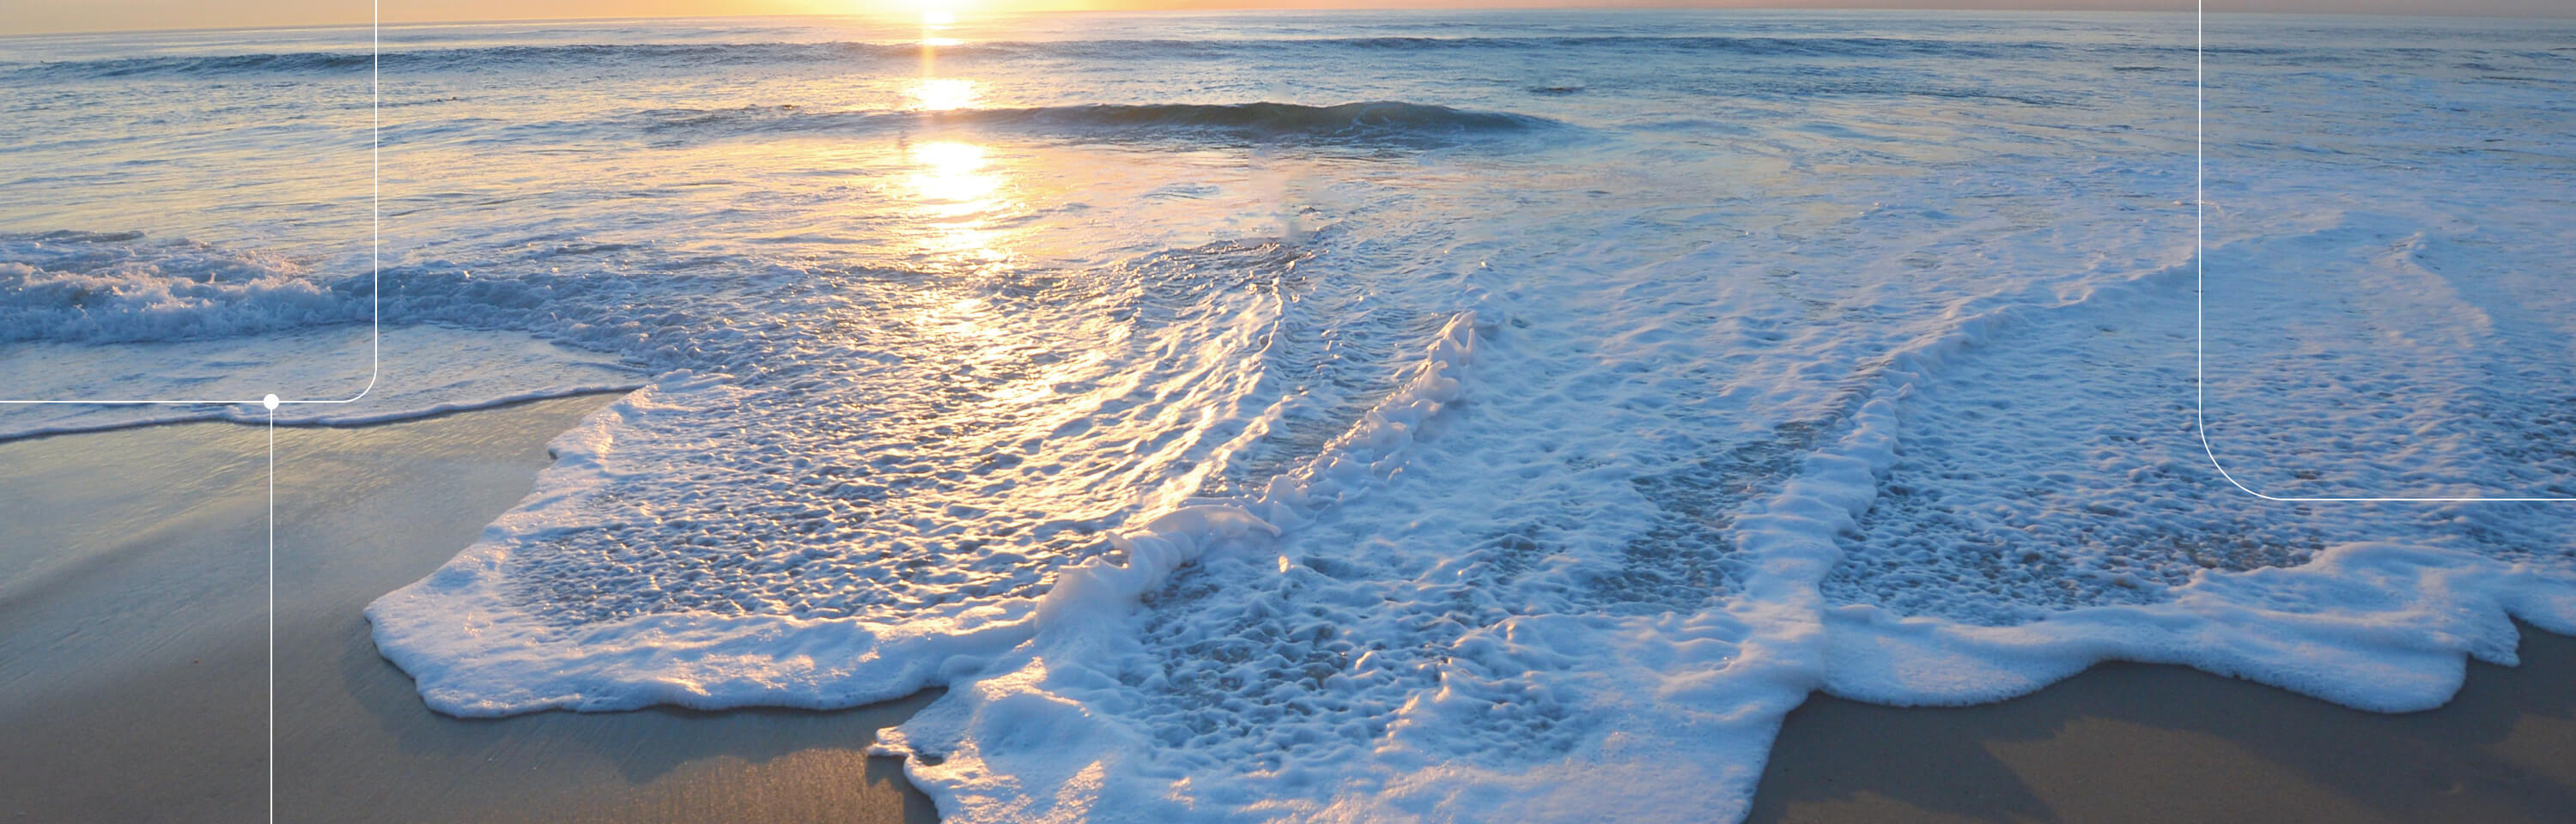 Ocean waves washing up on the shore in La Jolla, view looking out to the ocean with the sun on the horizon